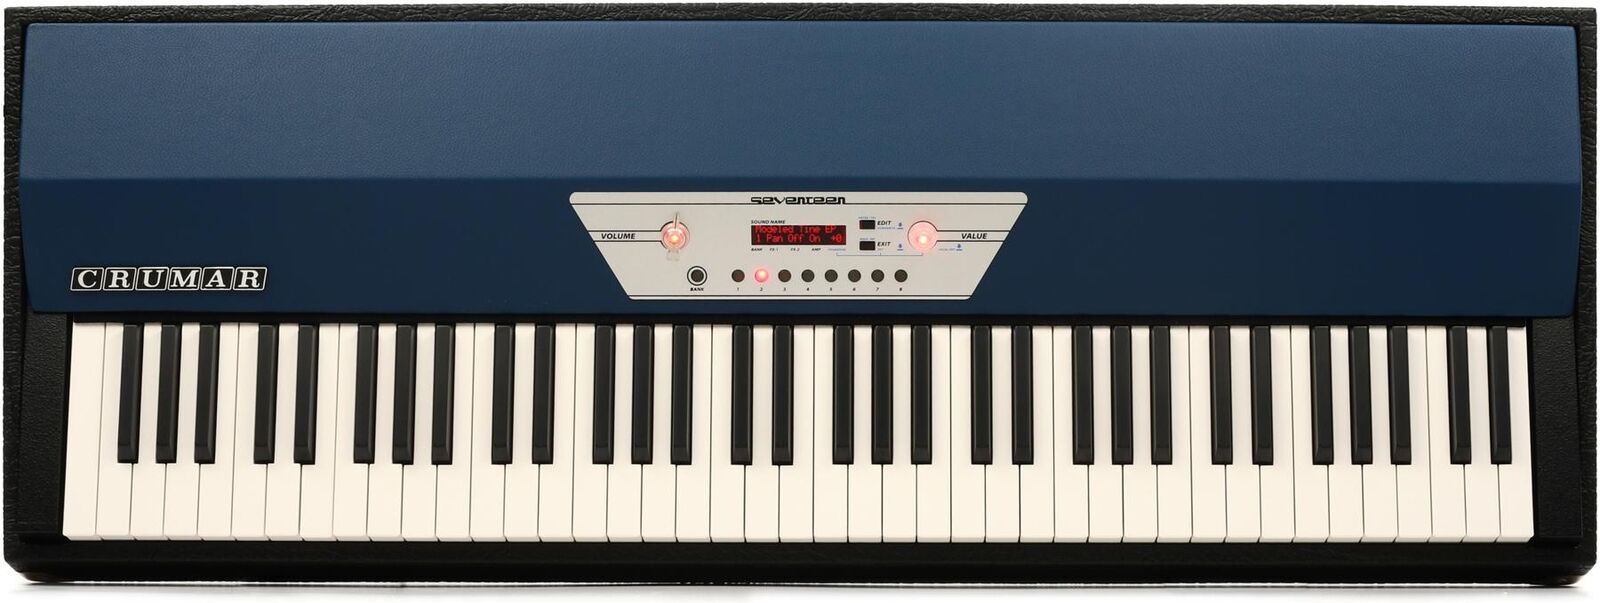 Crumar Seventeen Vintage-style Modeled Electric Piano